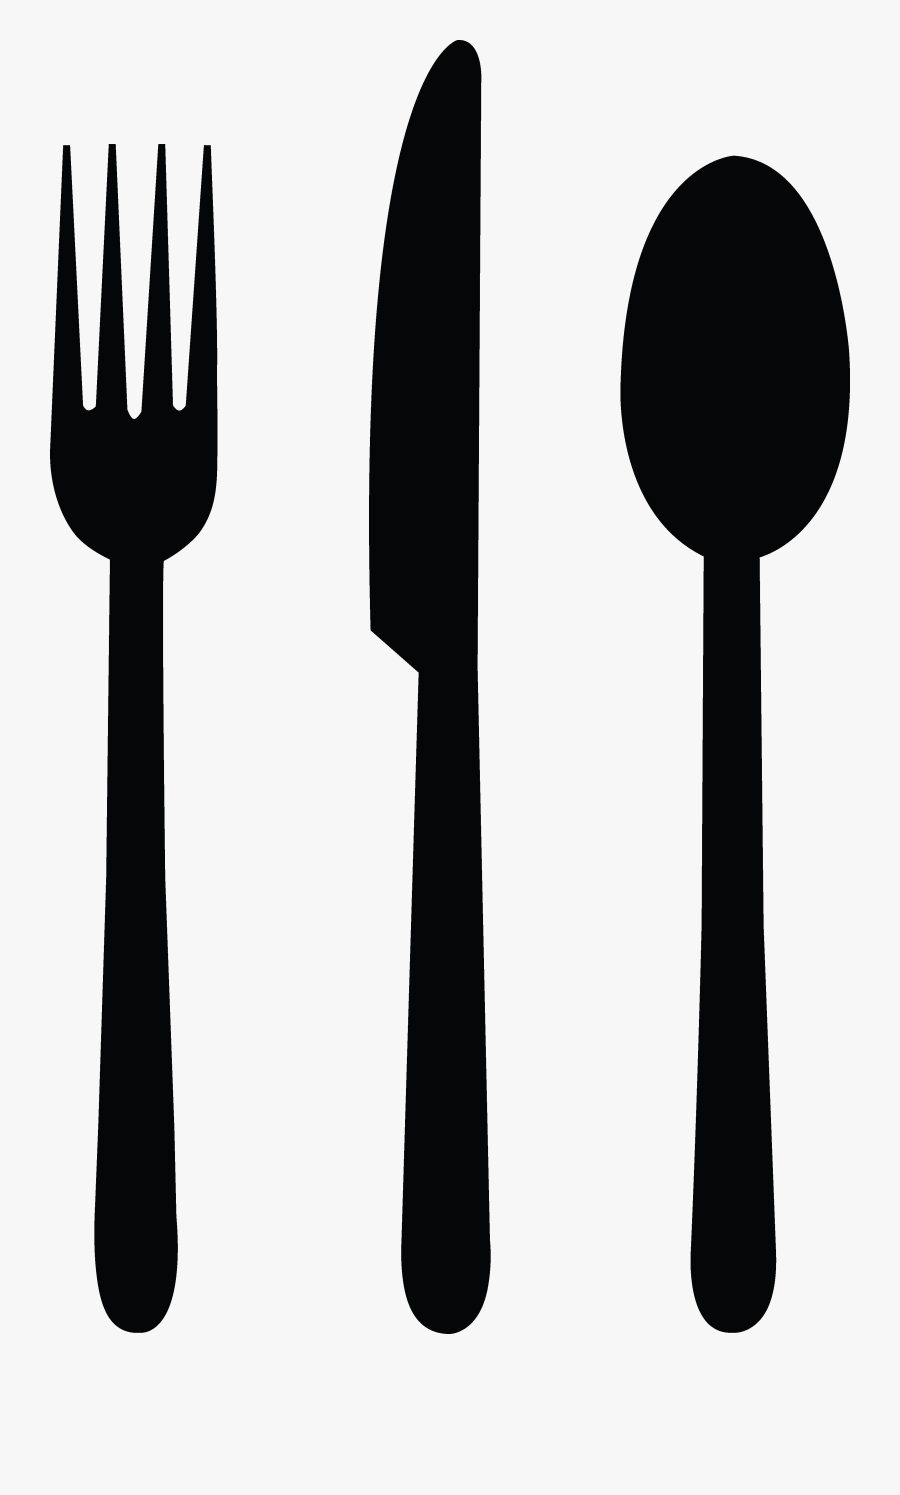 Knife And Fork Clipart Synkee - Spoon And Fork Clipart, Transparent Clipart